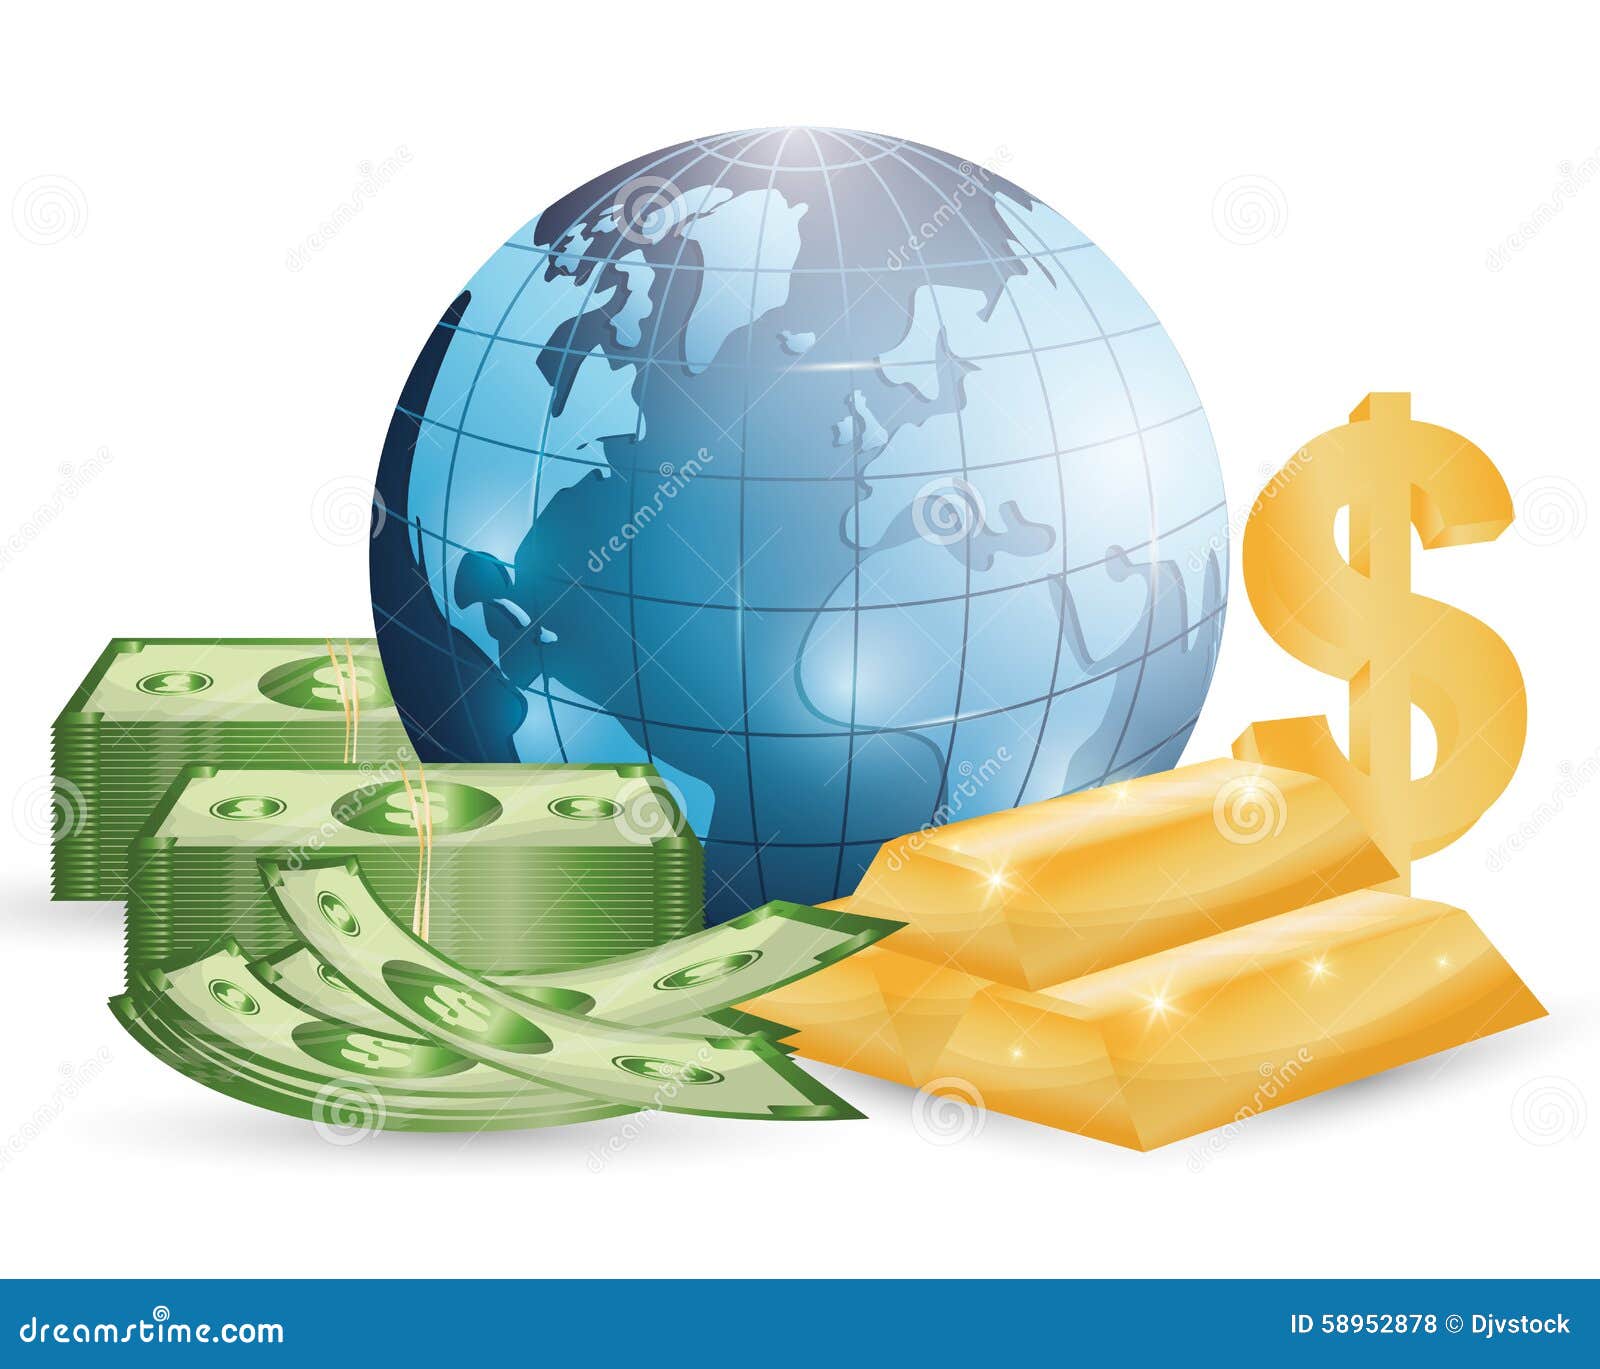 global business clipart - photo #40